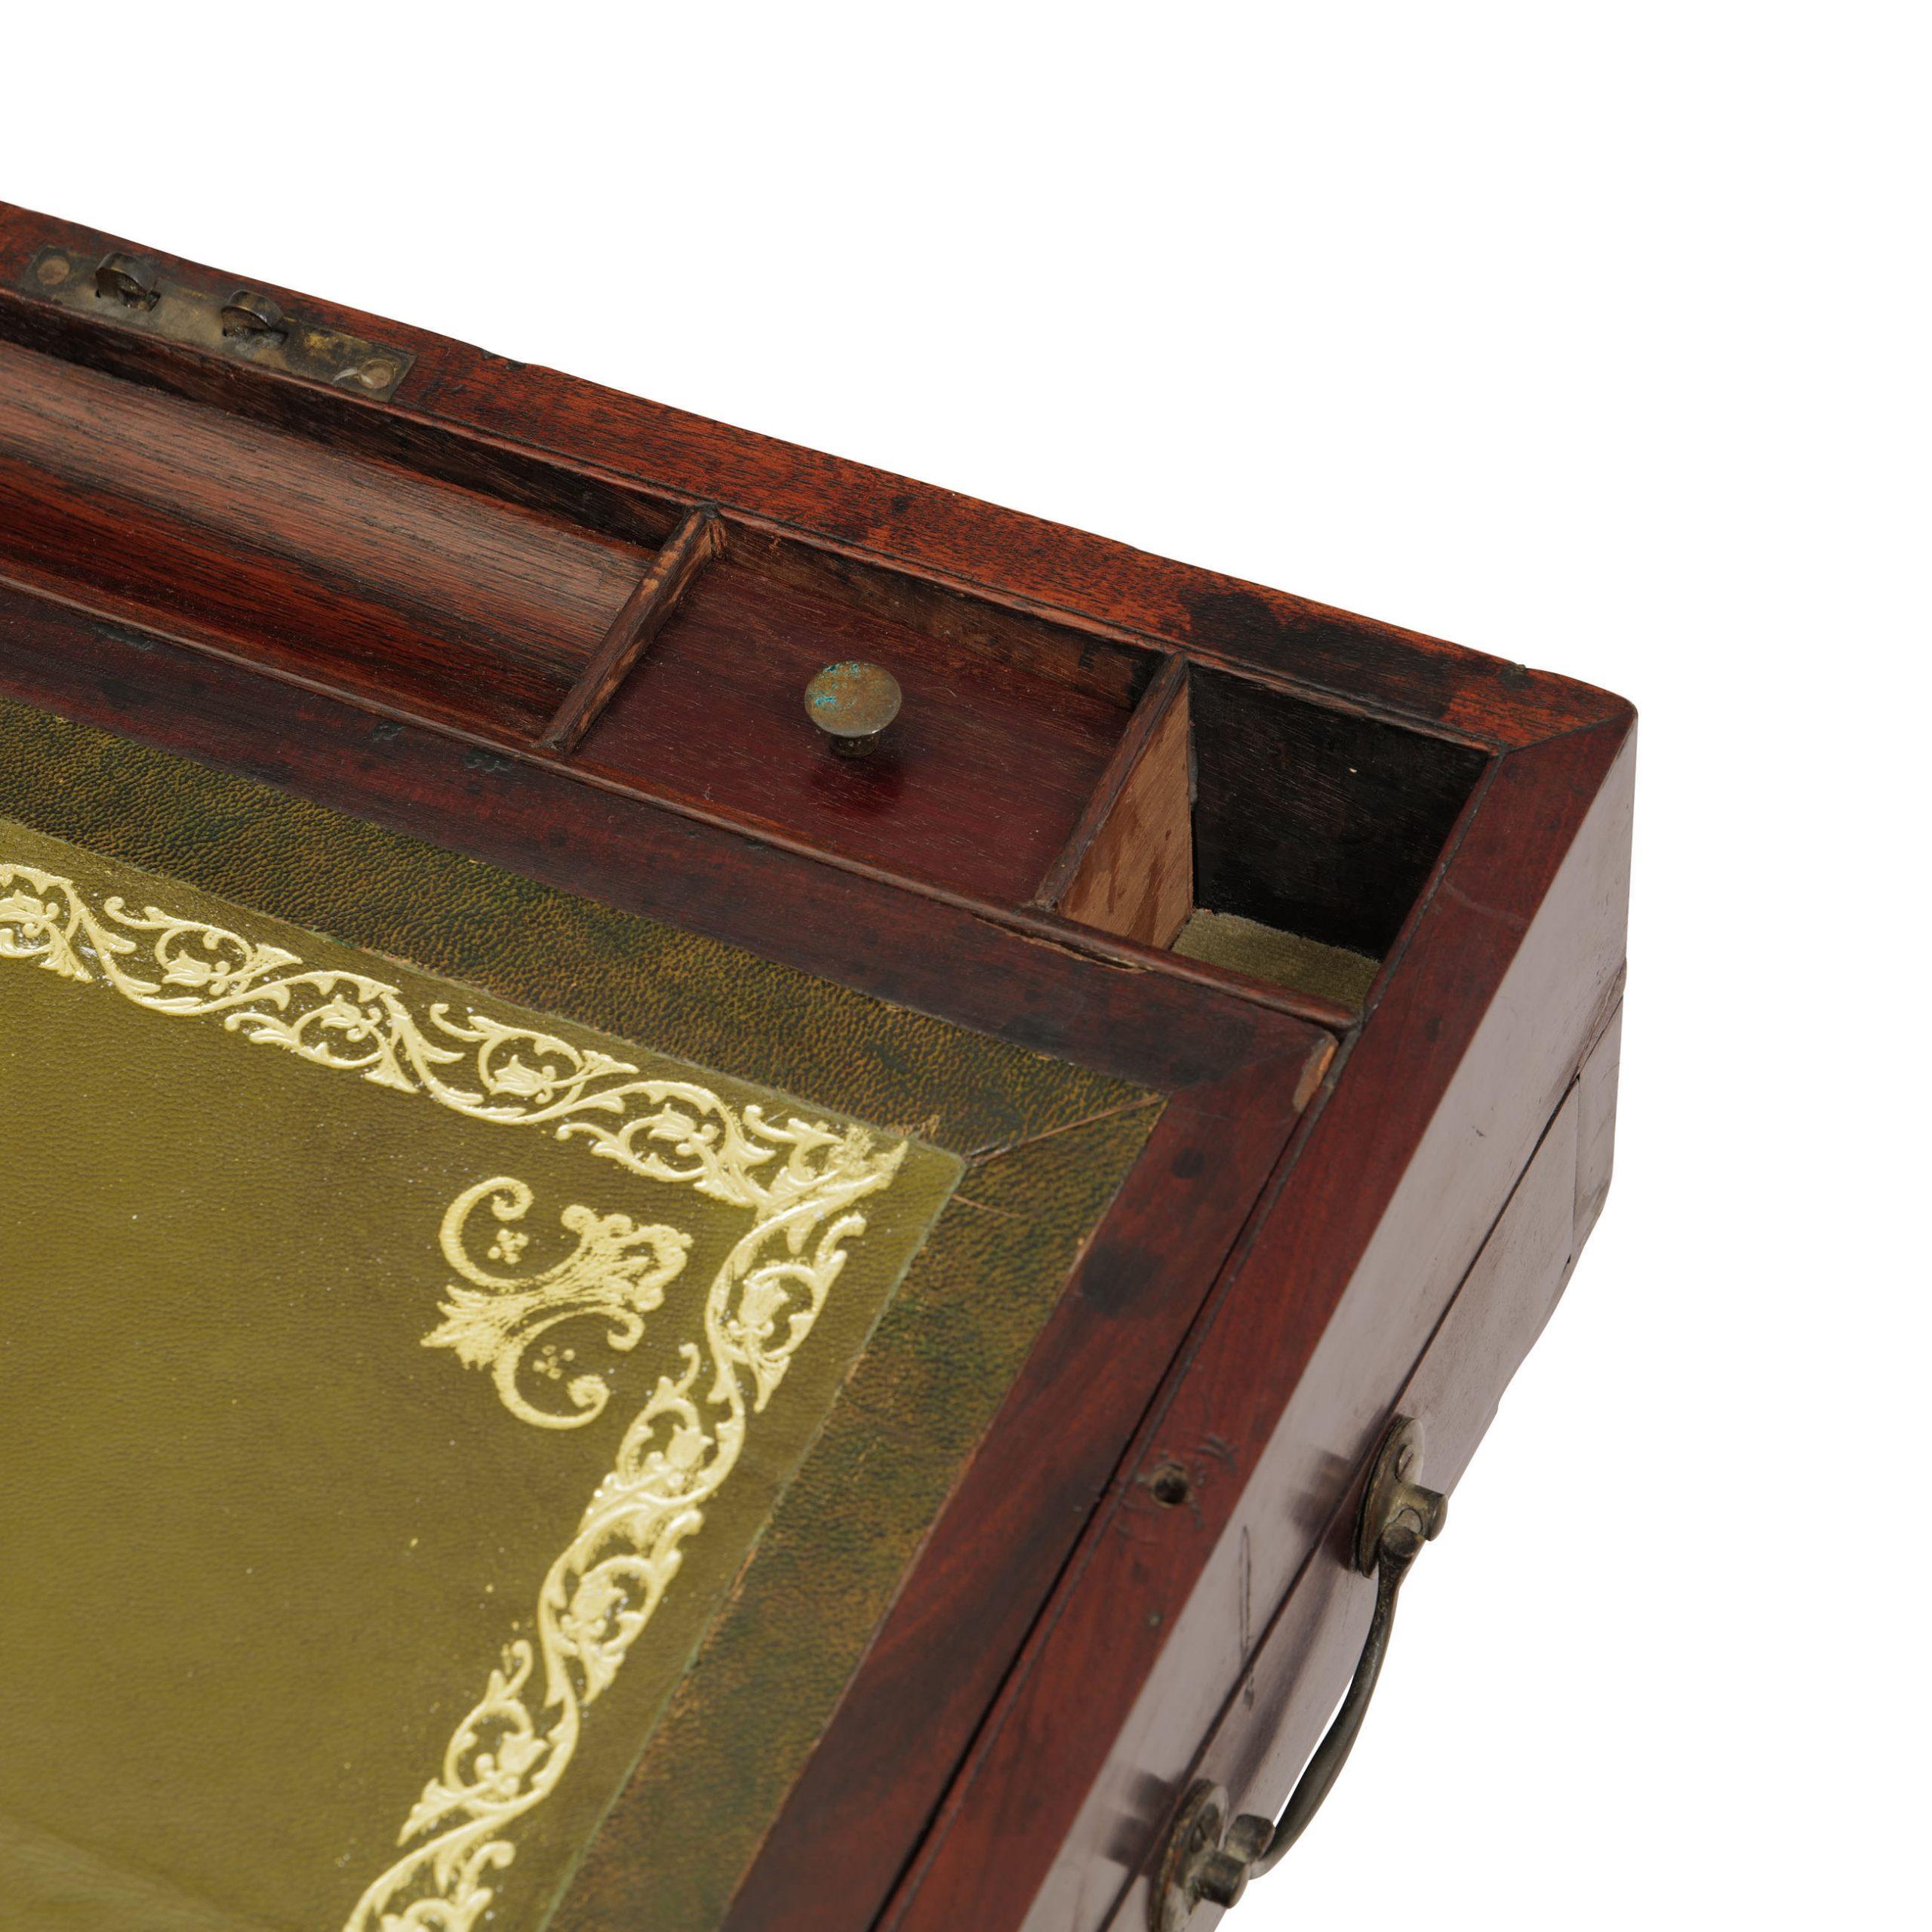 Writing box, mahogany, England, around 1810/20, writing surface with leather overlay, nice interior division, brass handles and brass inlay on the lid, nice patina condition

height: 15,5 cm, width: 45 cm, depth: 25 cm